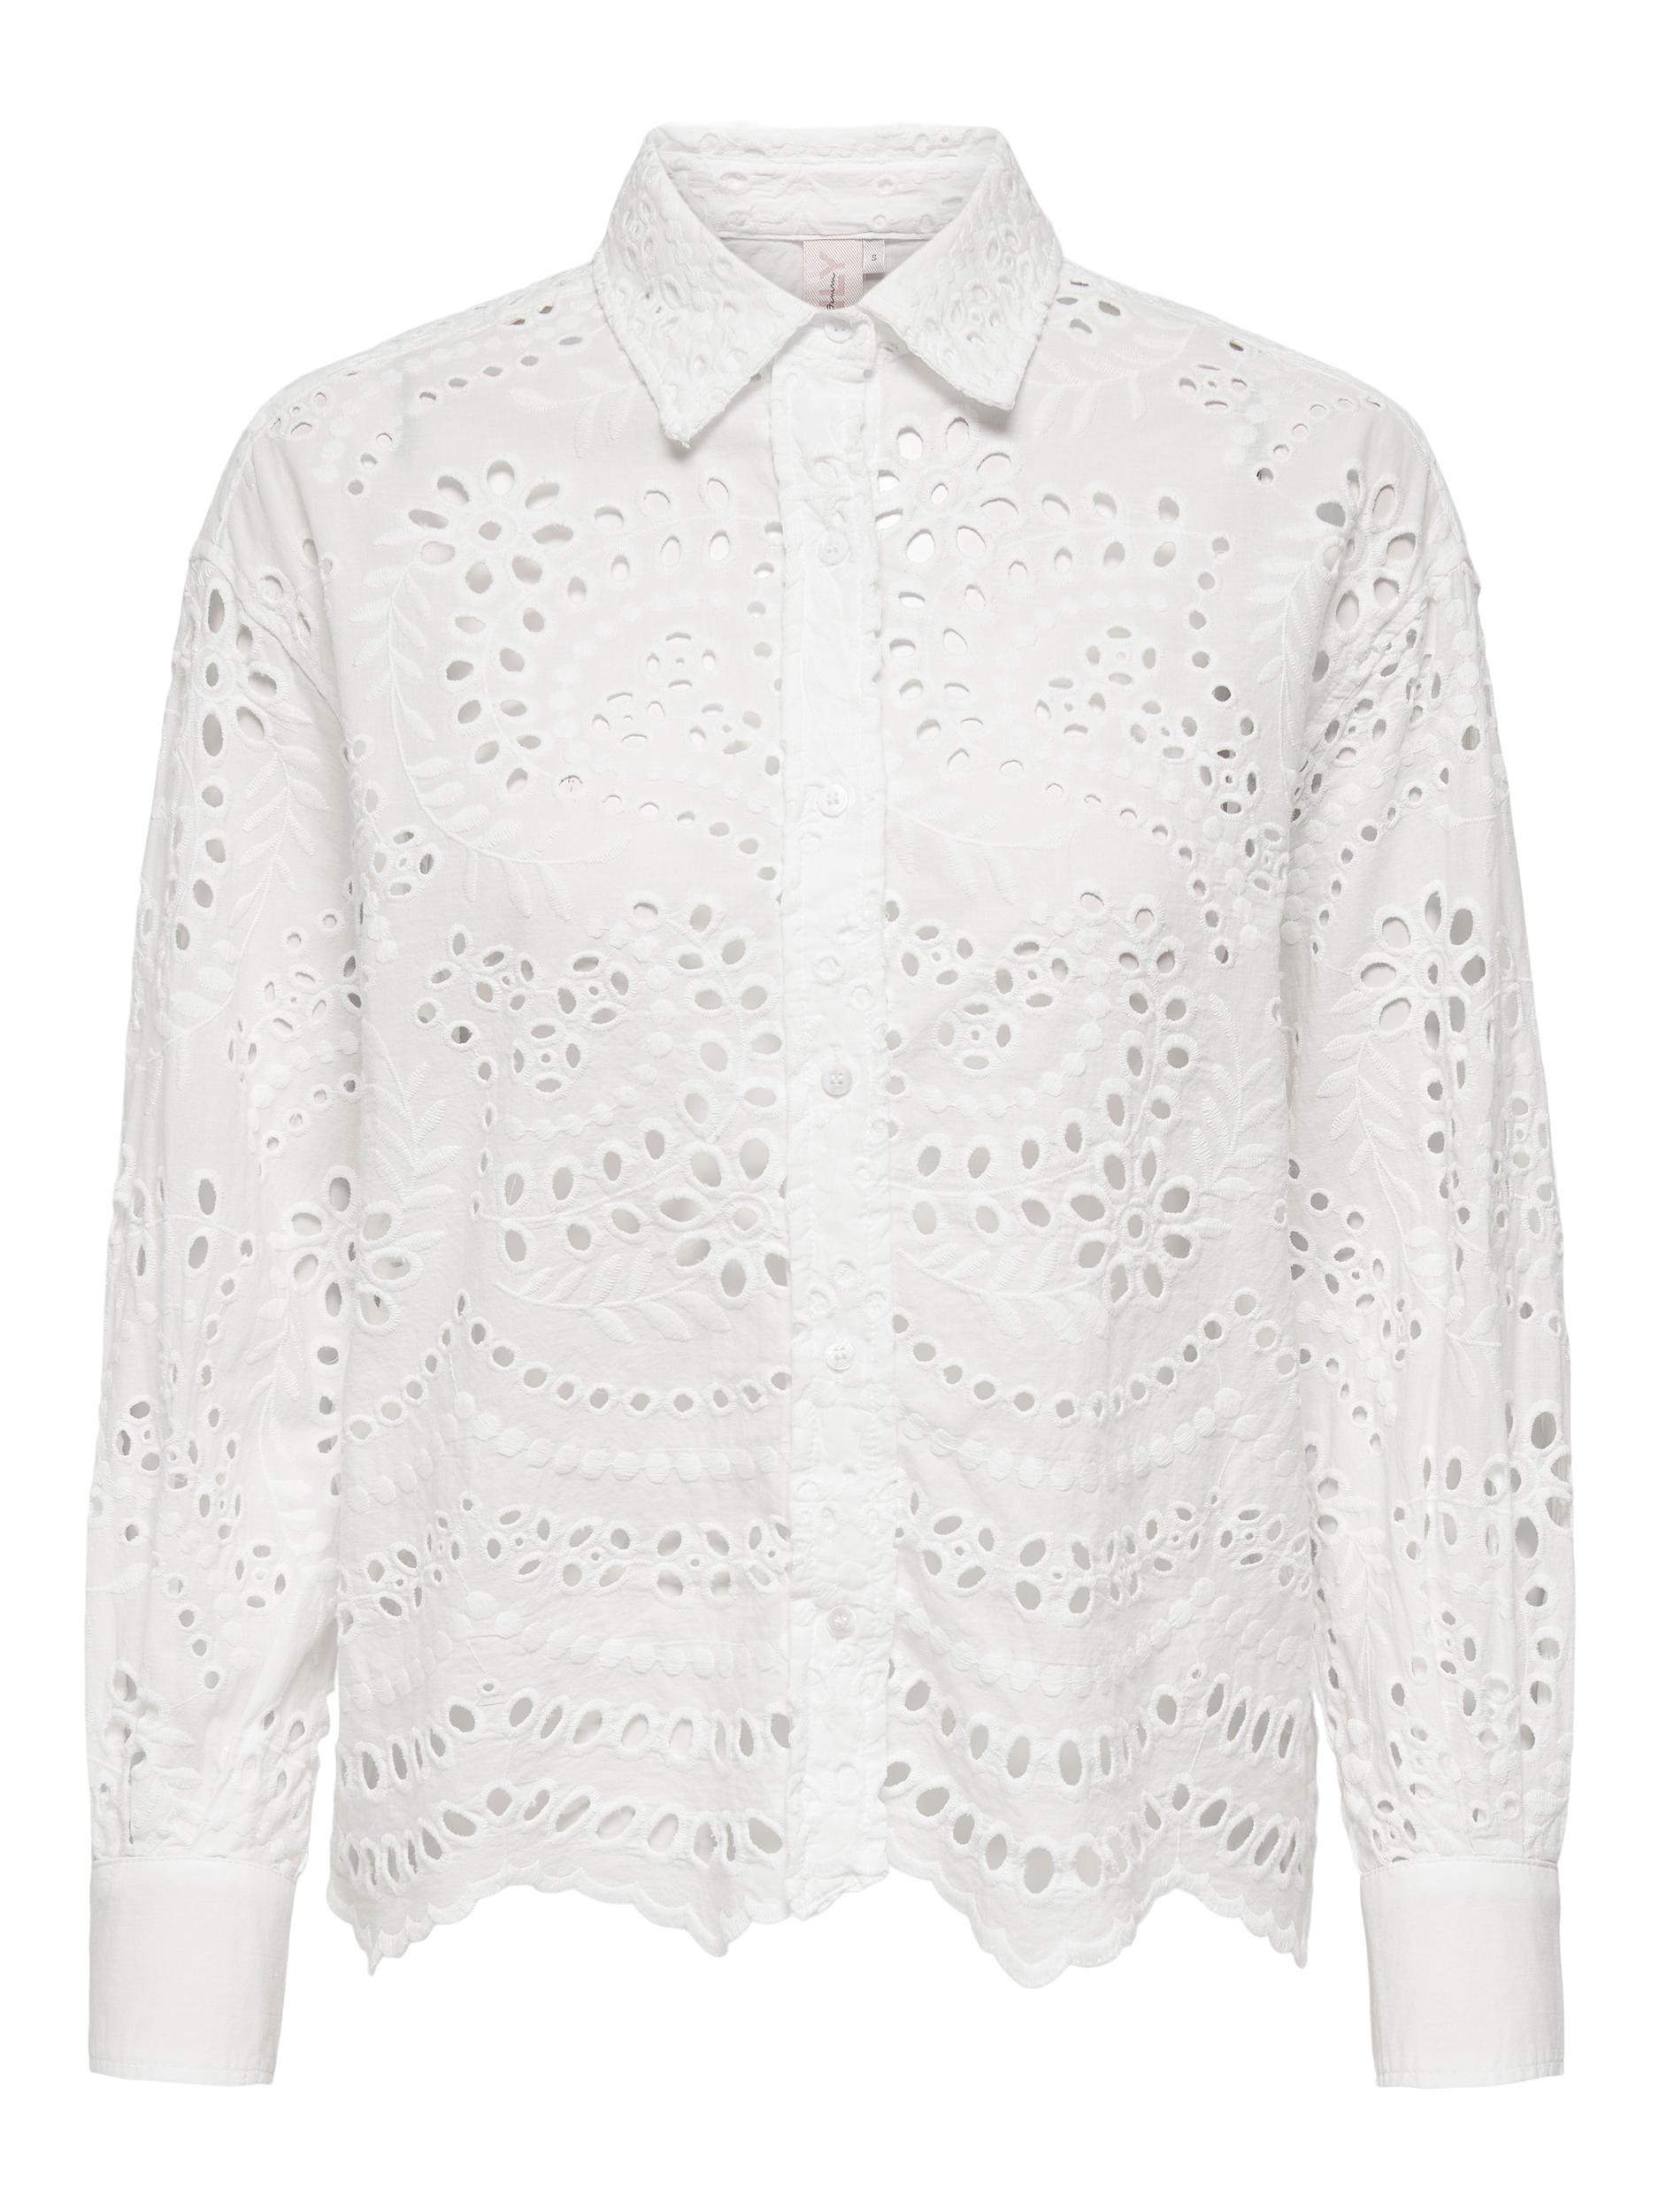 Only - Boxy fit lace shirt, White, large image number 0